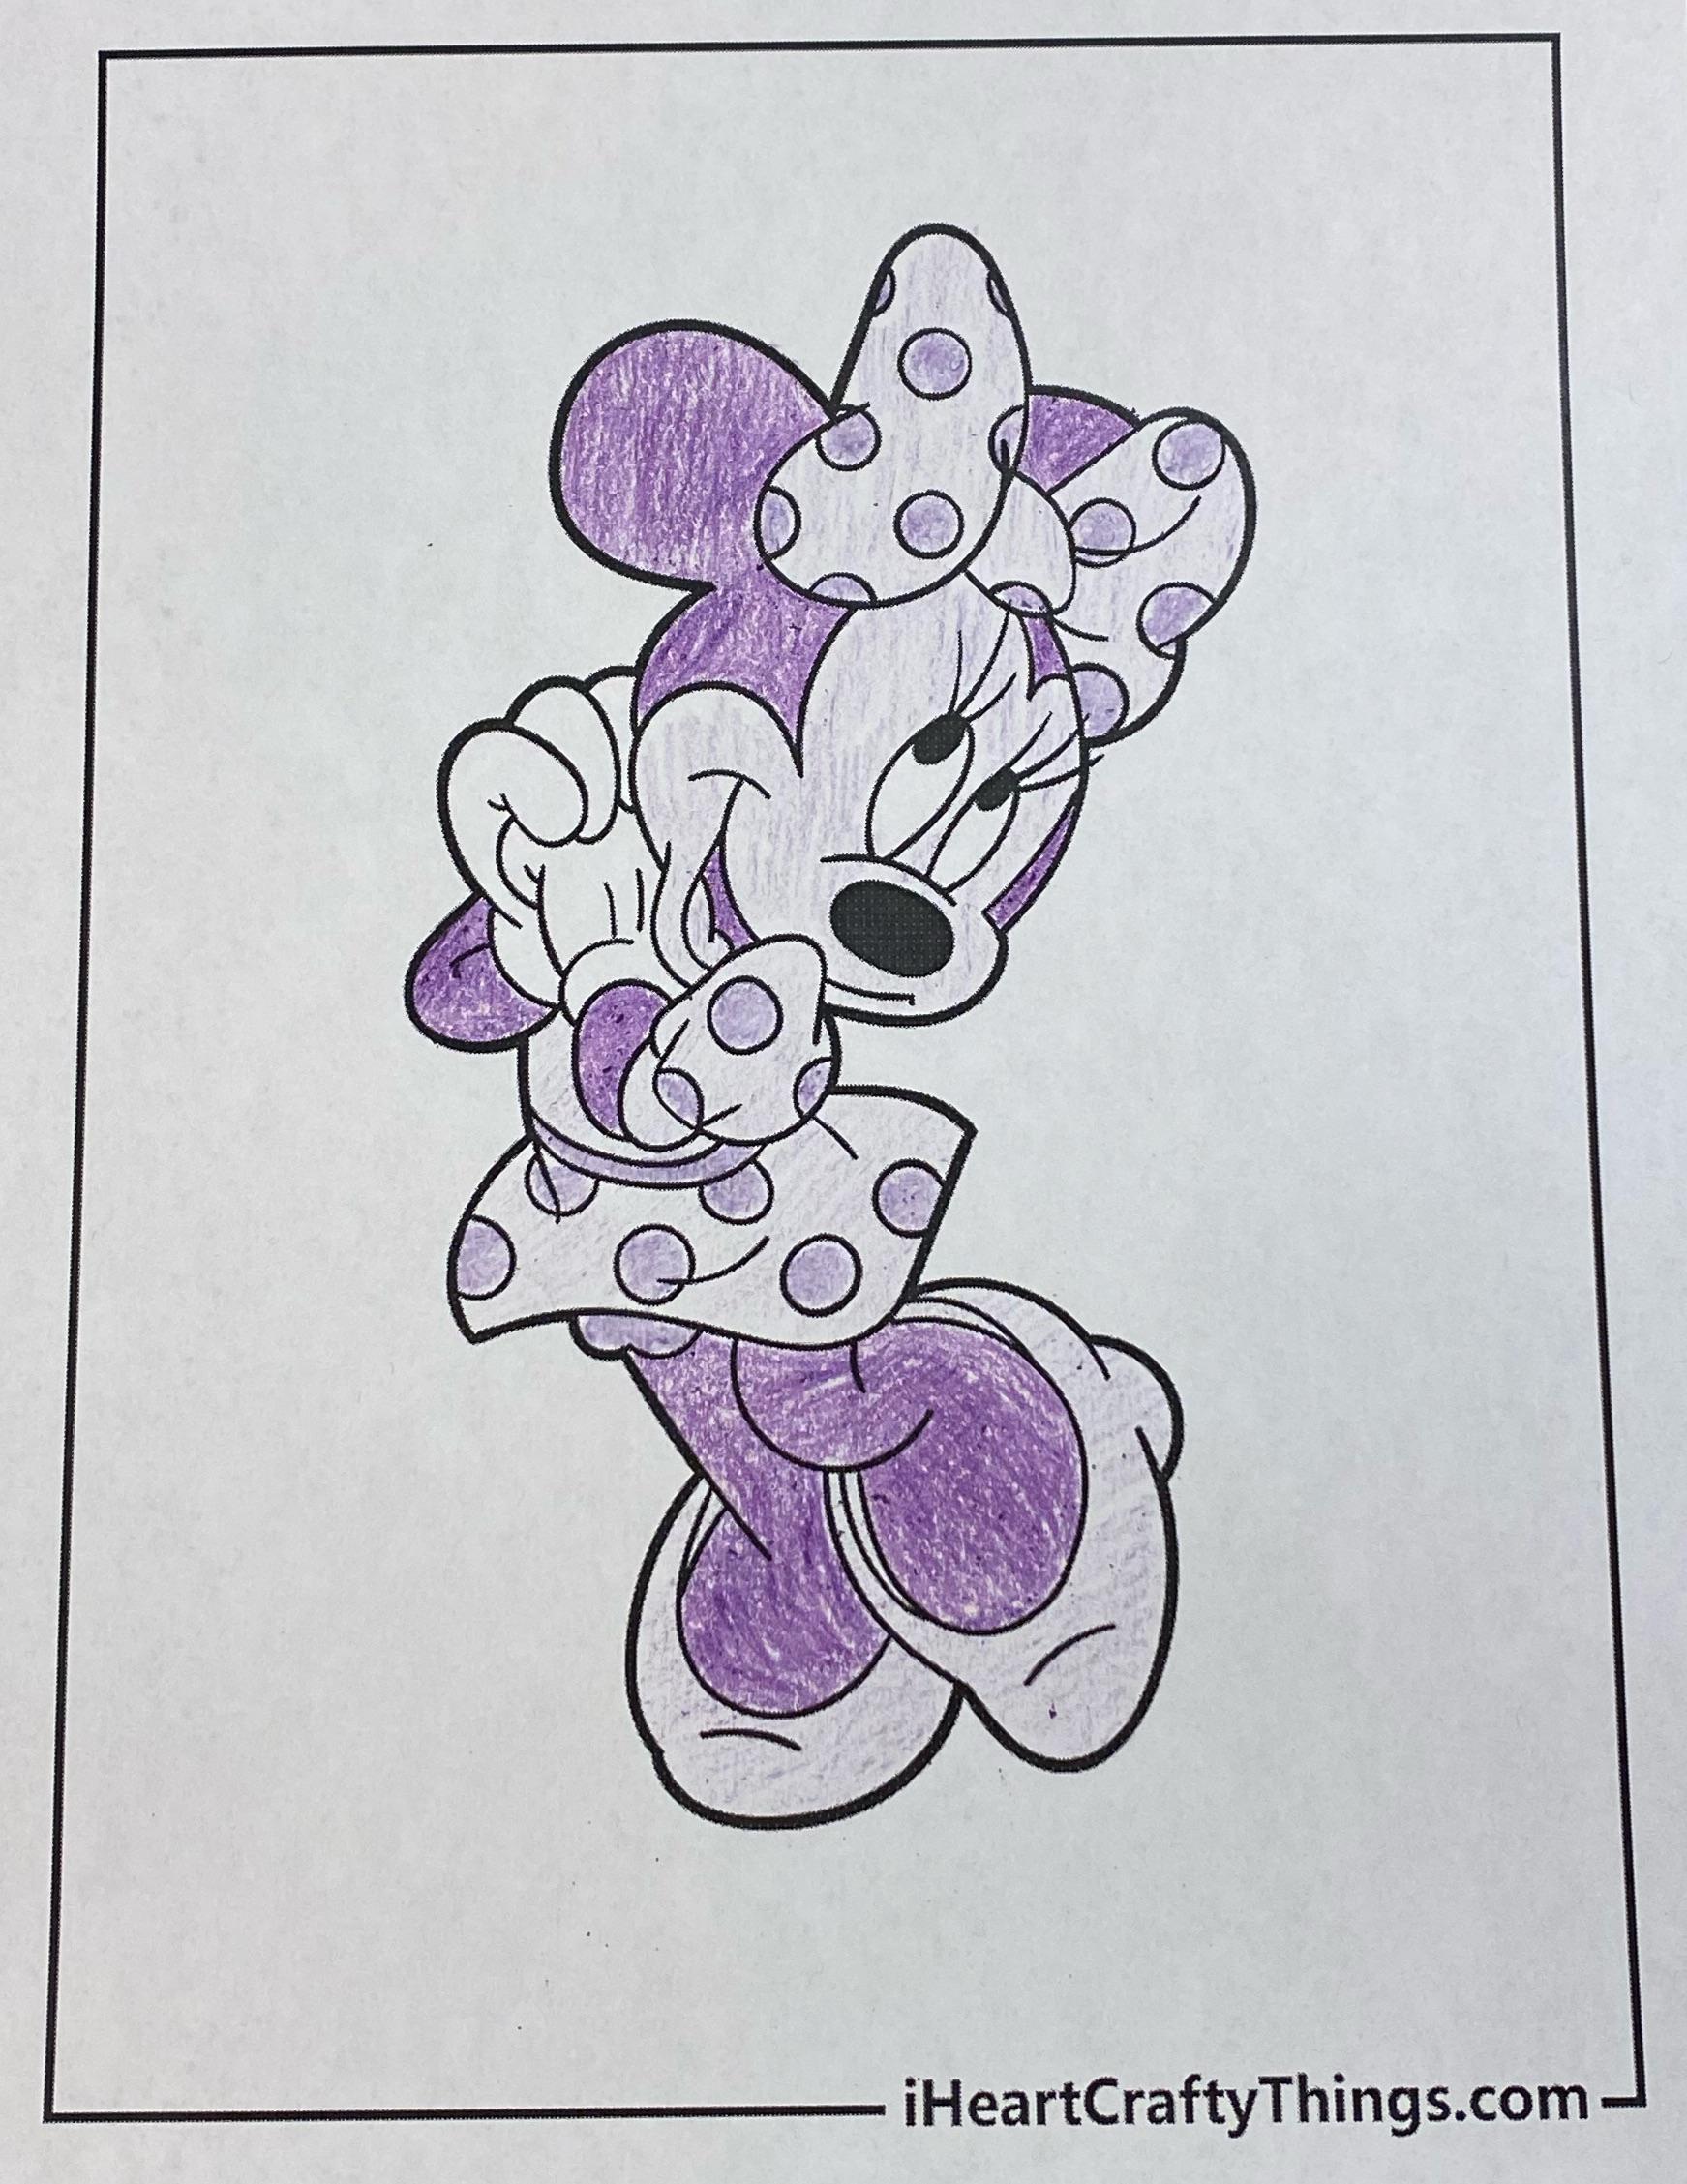 Minnie mouse coloring page pleted with a purple crayola crayon and a purple cent crayon rcoloring